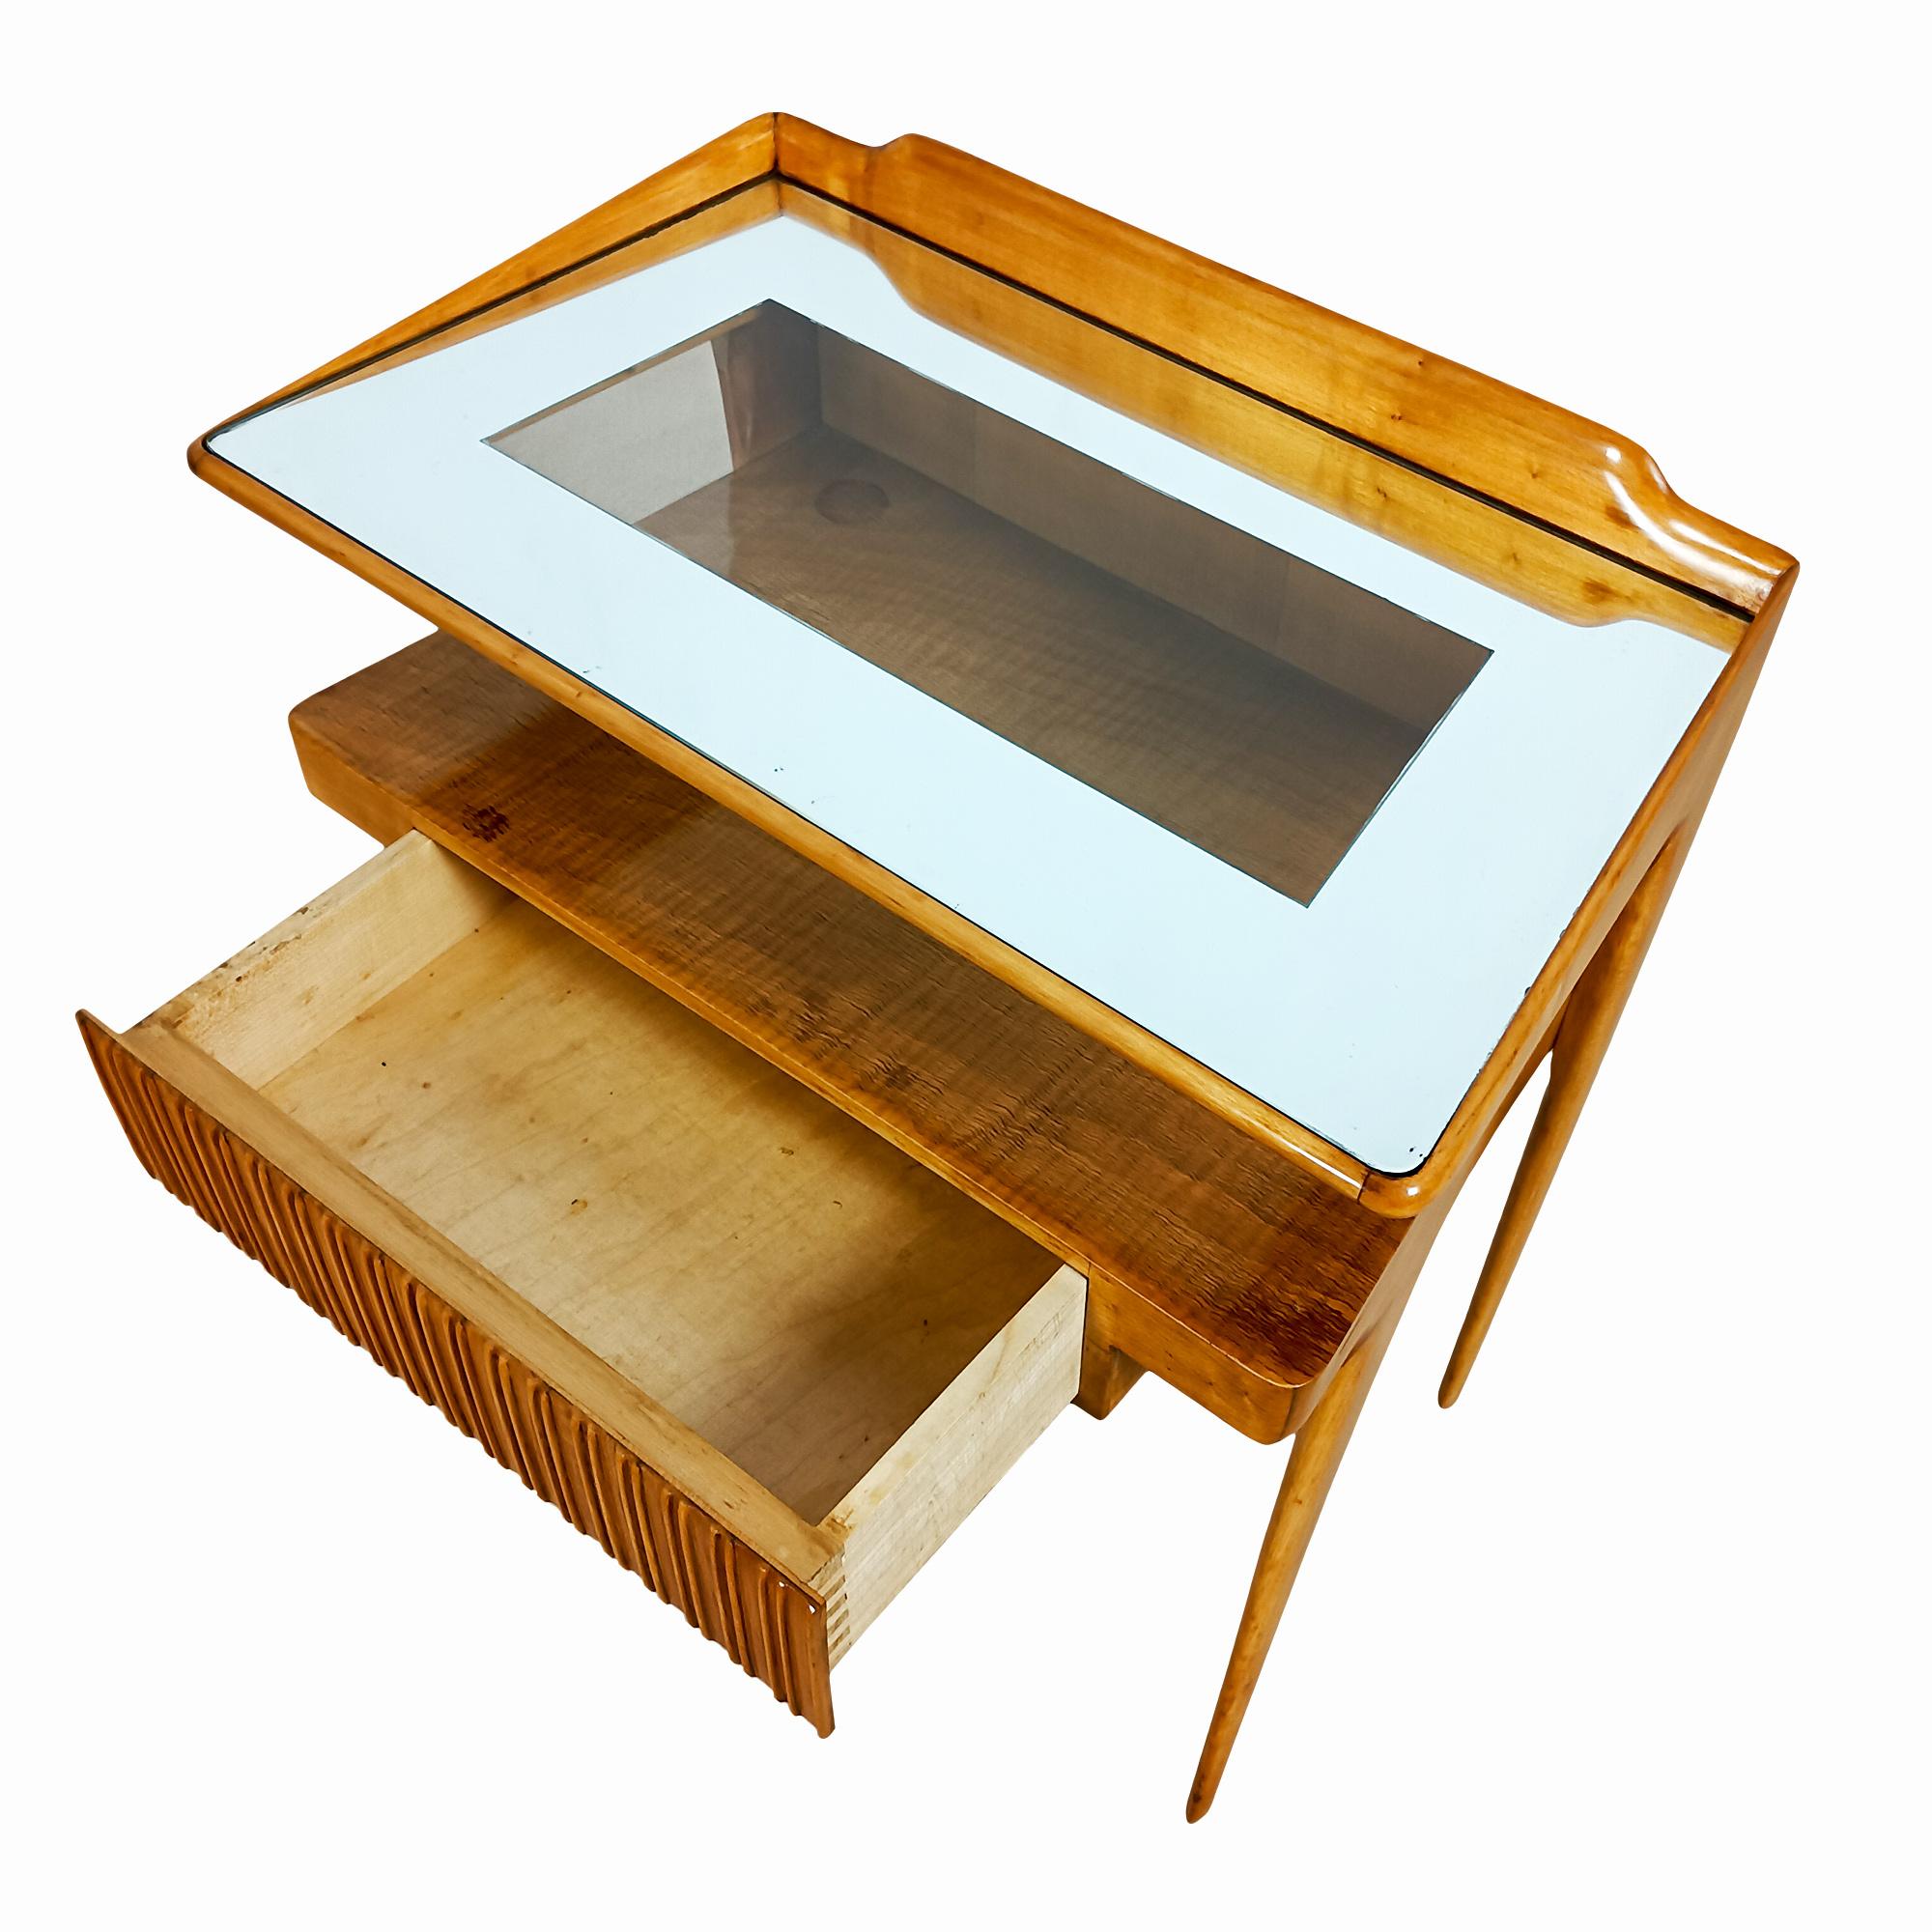 20th Century Pair of Mid-Century Modern Bedside Tables in Solid Maple and Glass Shelf, Italy For Sale